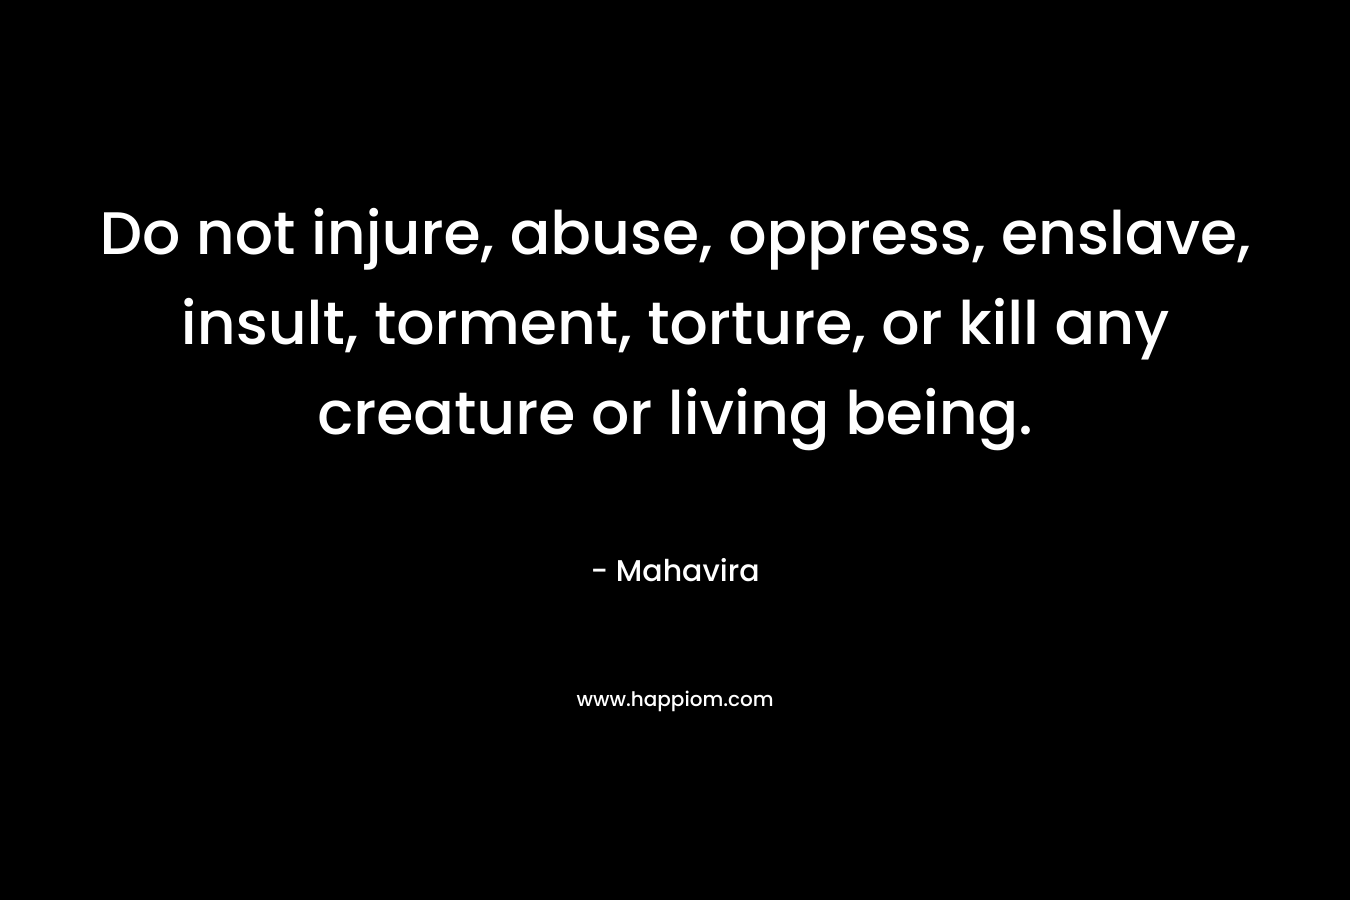 Do not injure, abuse, oppress, enslave, insult, torment, torture, or kill any creature or living being. – Mahavira